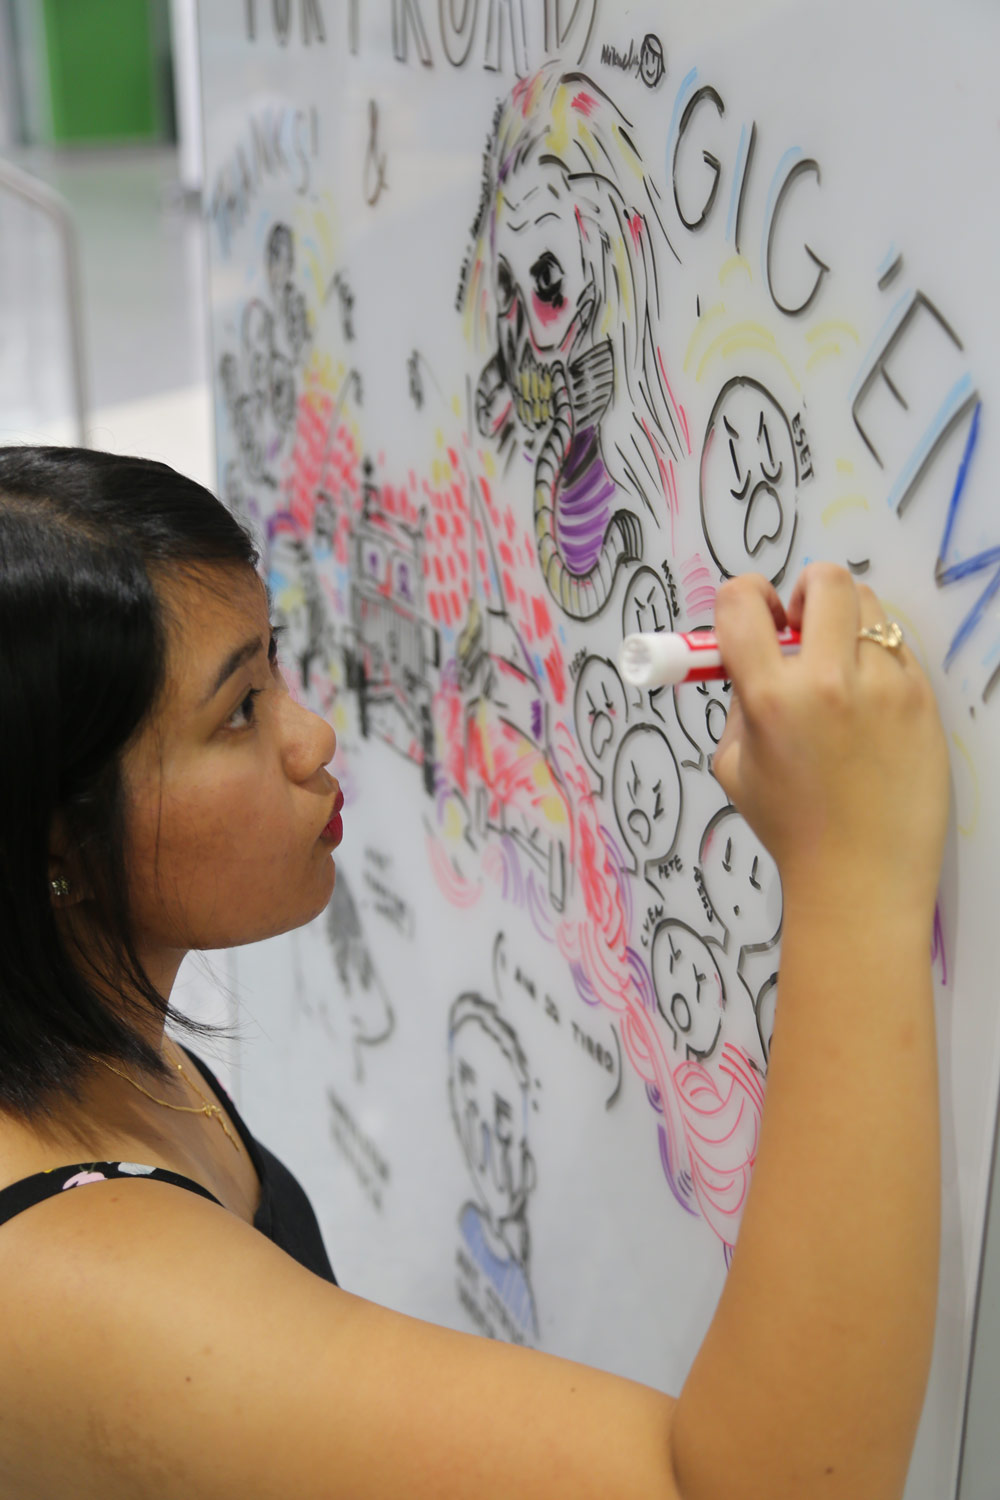 Student draws inspirational graphics on white board for fellow students.